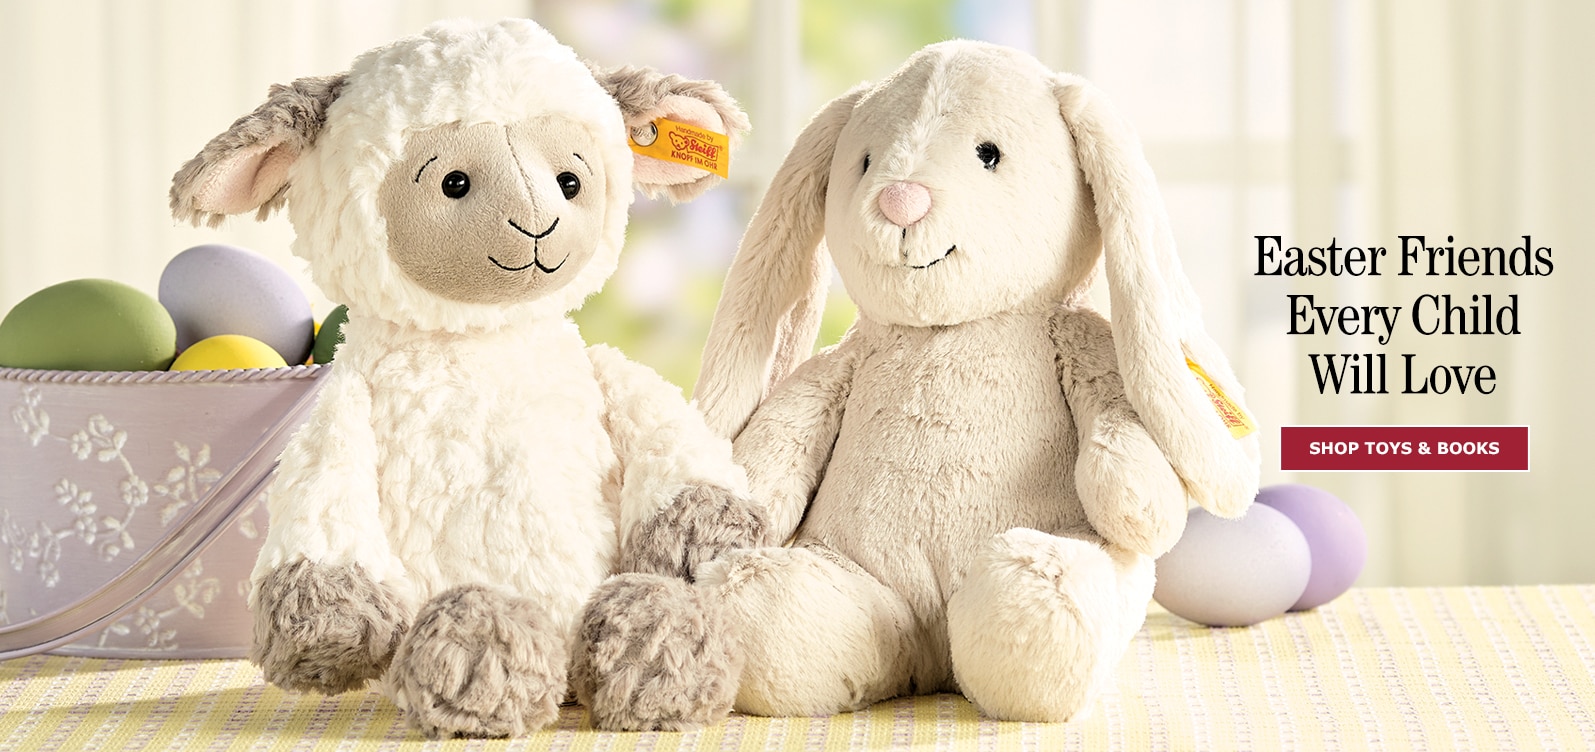 Easter Friends Every Child Will Love. Shop Toys & Books